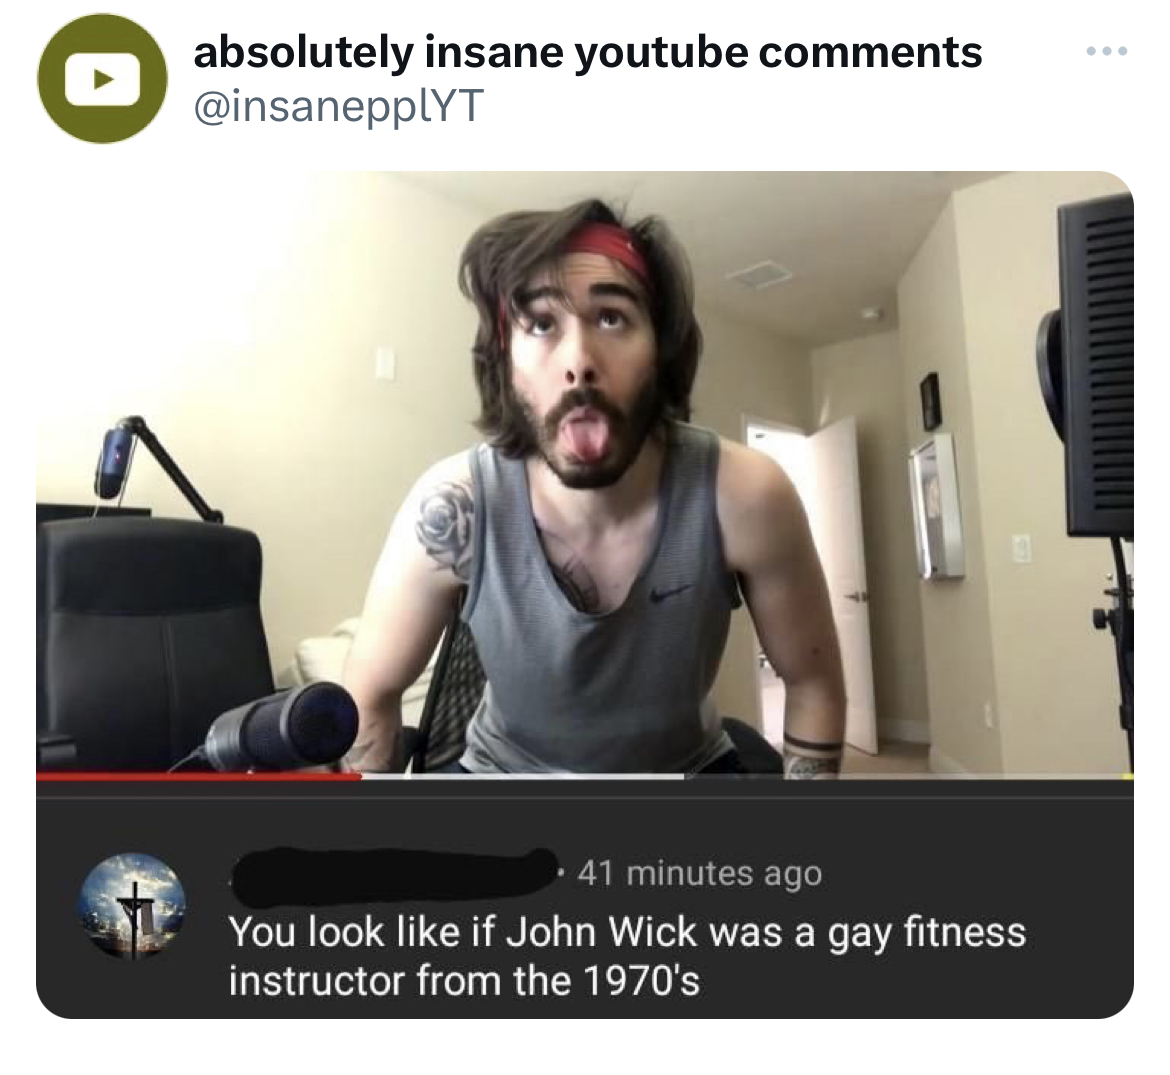 savage and absurd tweets - he is risen - absolutely insane youtube 41 minutes ago You look if John Wick was a gay fitness instructor from the 1970's